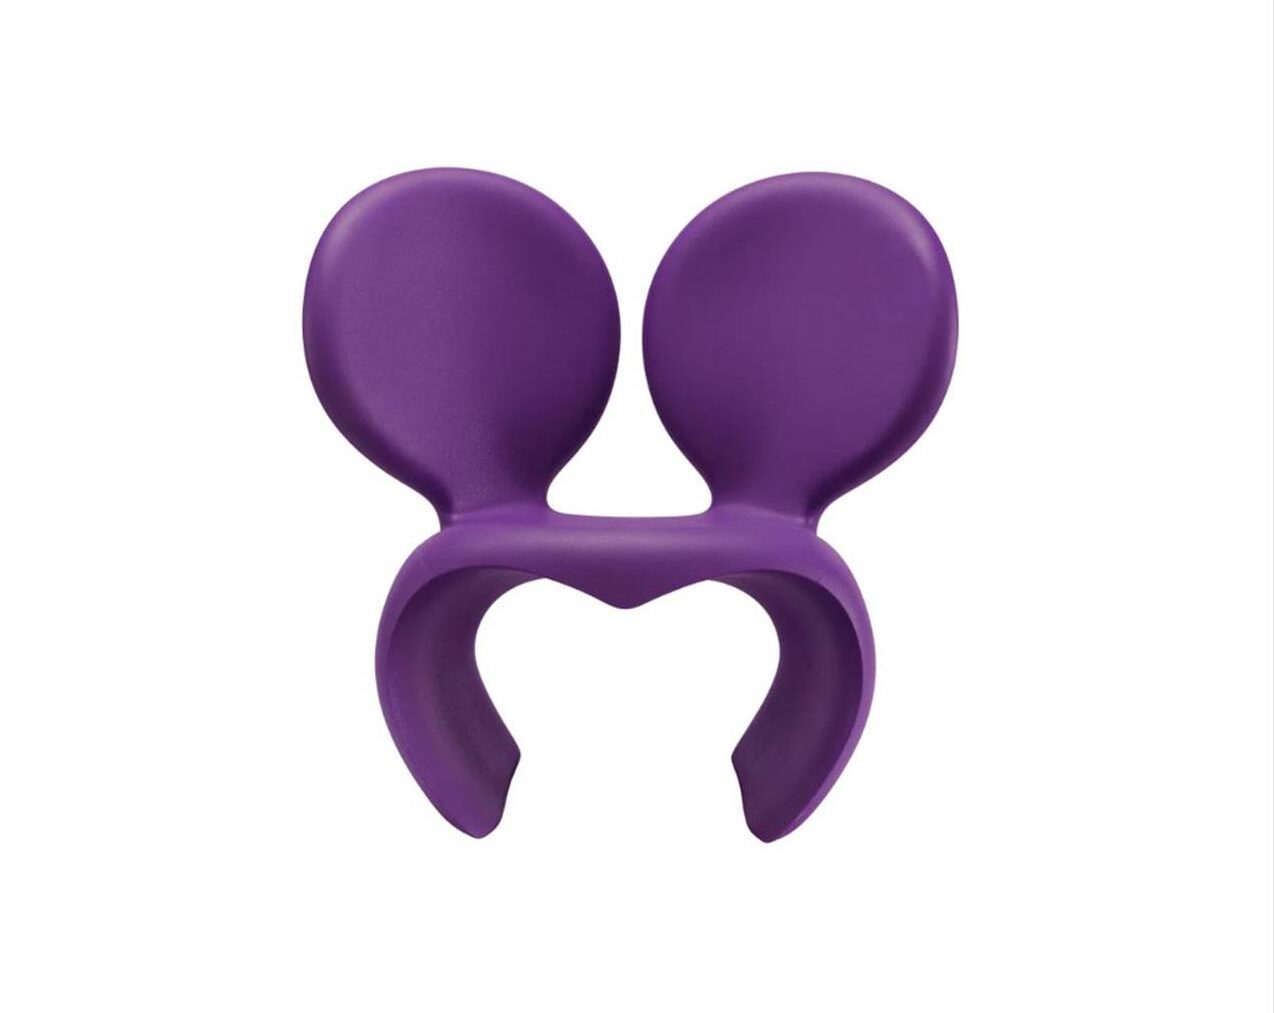 Dont-FK-With-The-Mouse-Armchair-Purple